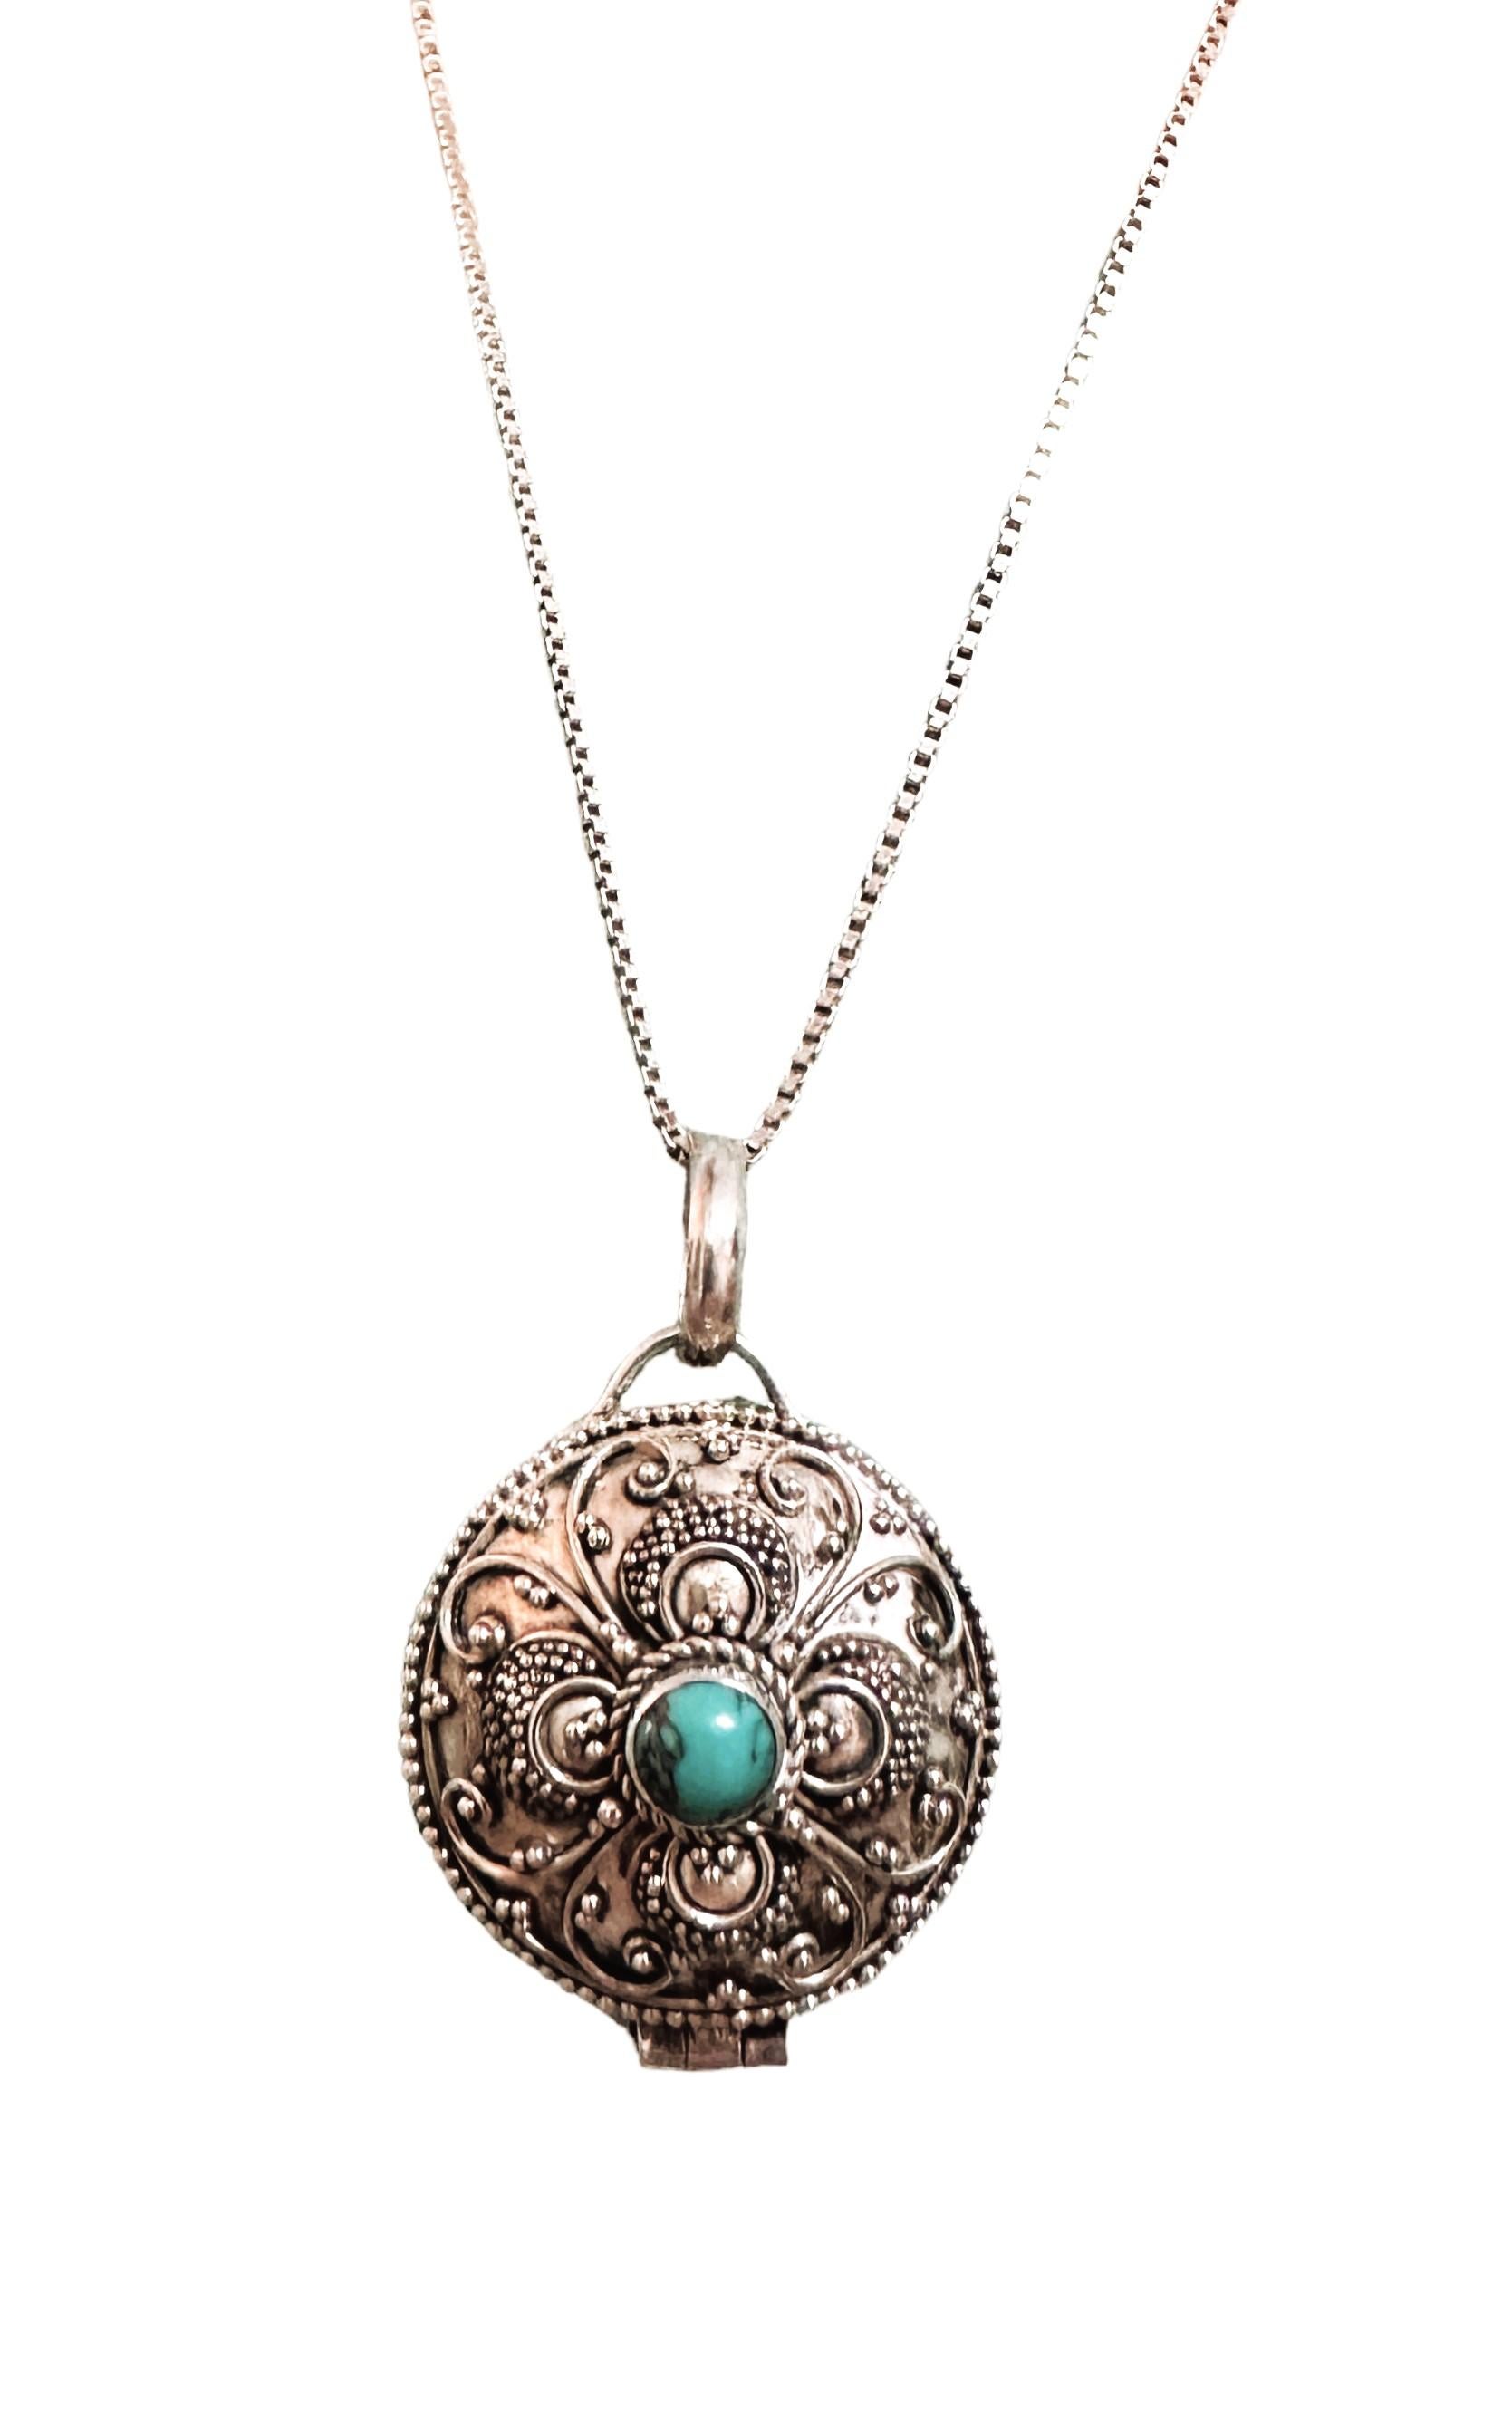 Round Cut Vintage 925 Sterling Silver & Turquoise Pill Box Locket with Chain Necklace For Sale